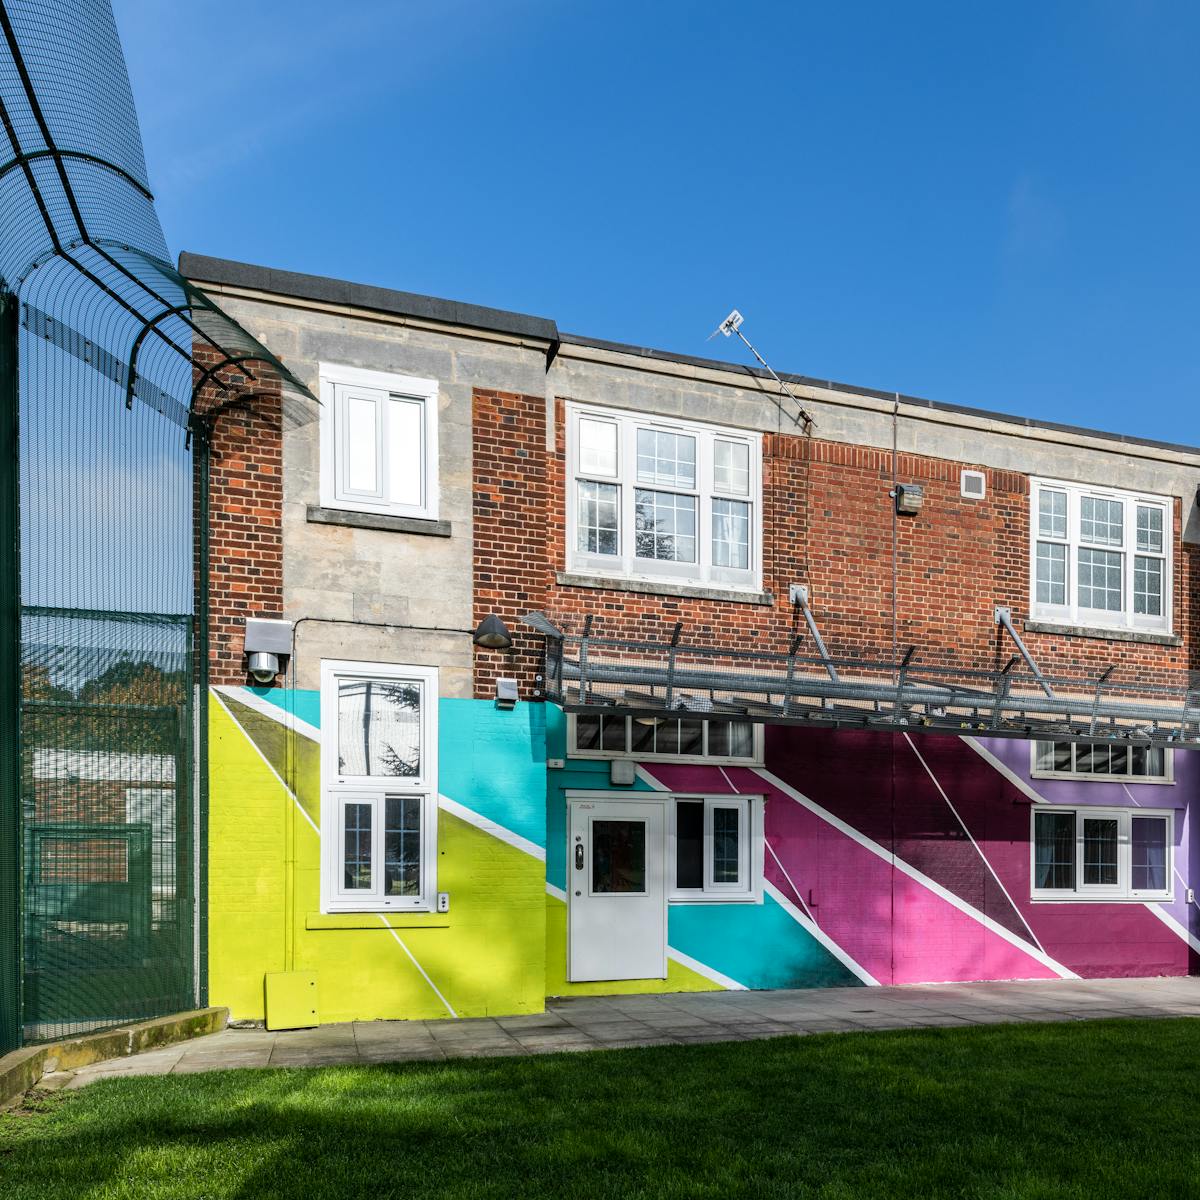 The photograph shows a flat roofed two-storey brick building with white PVC windows surrounded by a tall perimeter fence with a grassy area in the foreground. The lower storey of the building is painted with wide brightly coloured diagonal stripes in lime green, sky blue and various tones of purple separated with narrow bands of white. Under the windows on the upper storey there appears to be a safety fence.